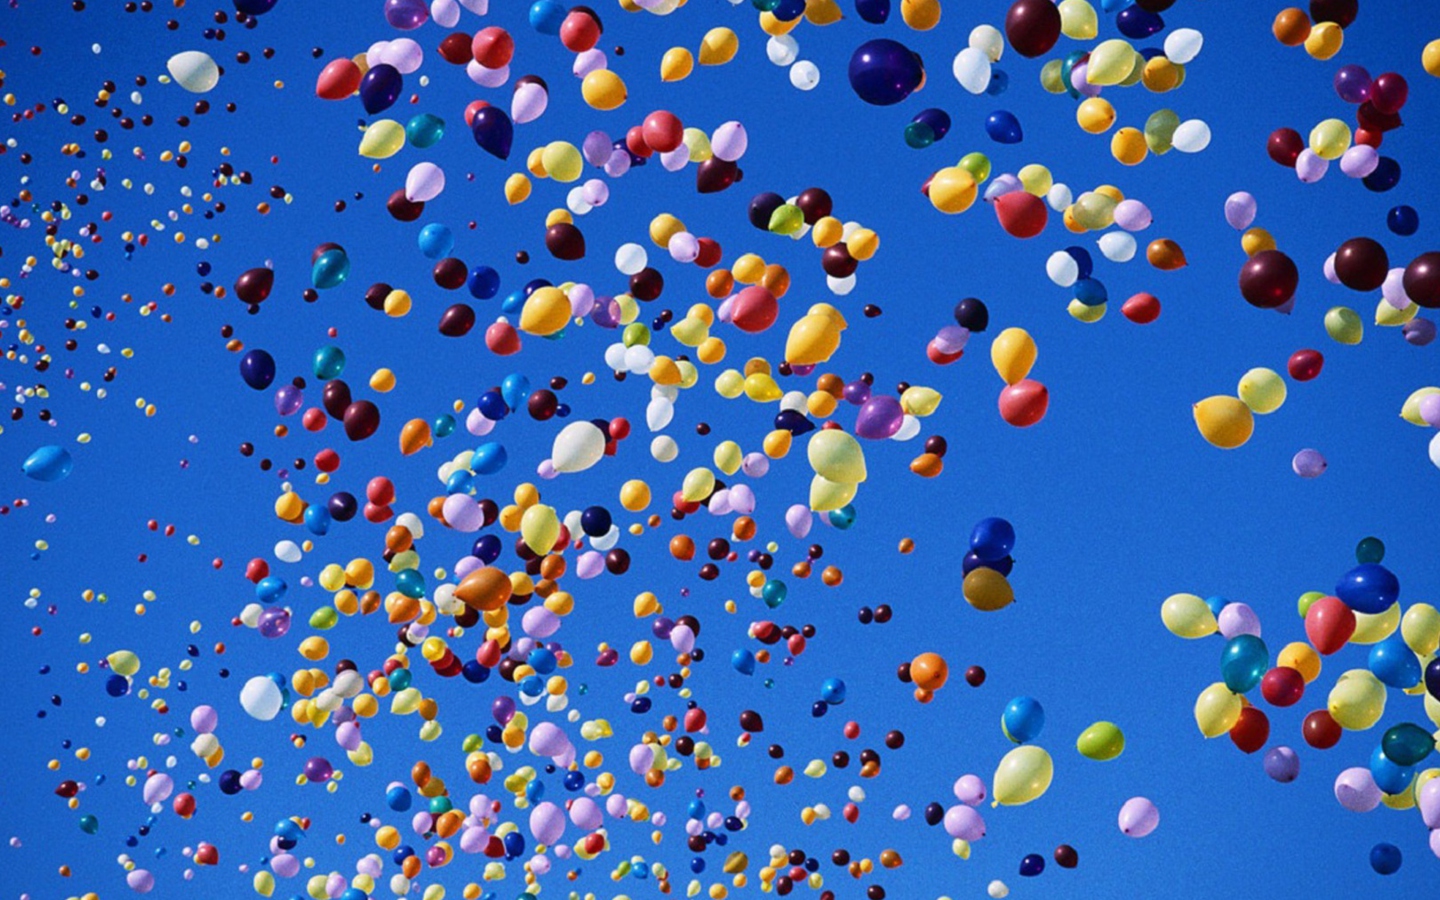 Colorful Balloons In Blue Sky screenshot #1 1440x900